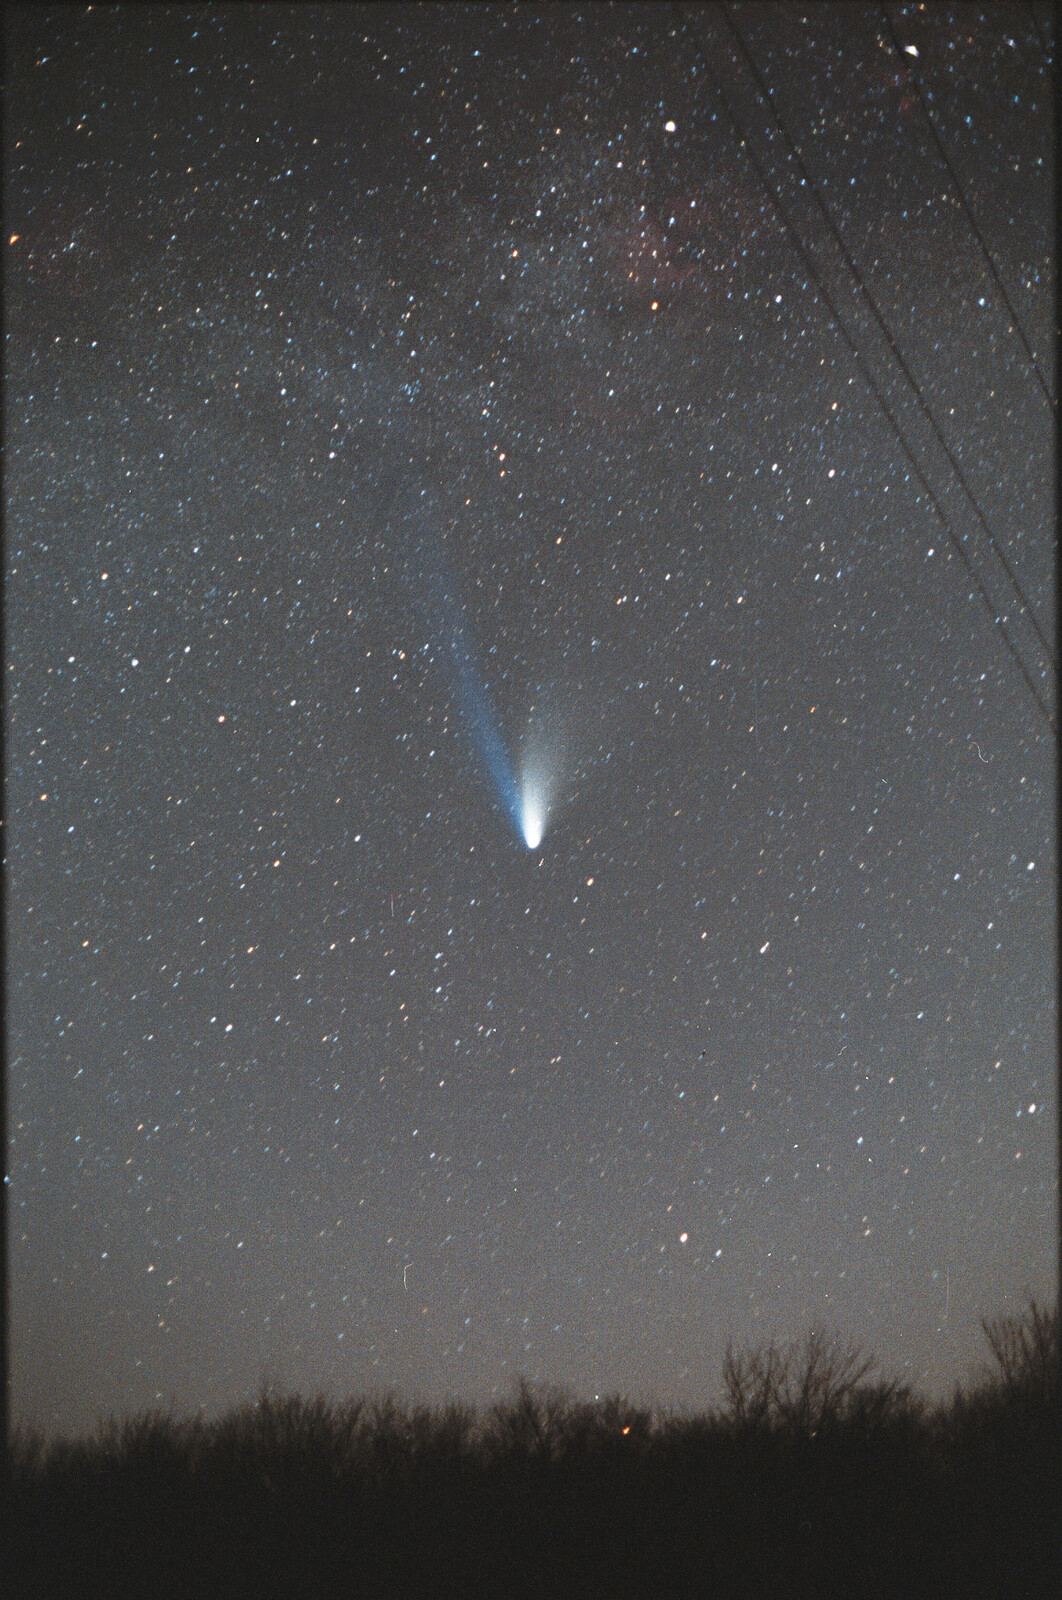 Comet Hale-Bopp on March 9th, 1997 from Tobyhanna State Park, PA